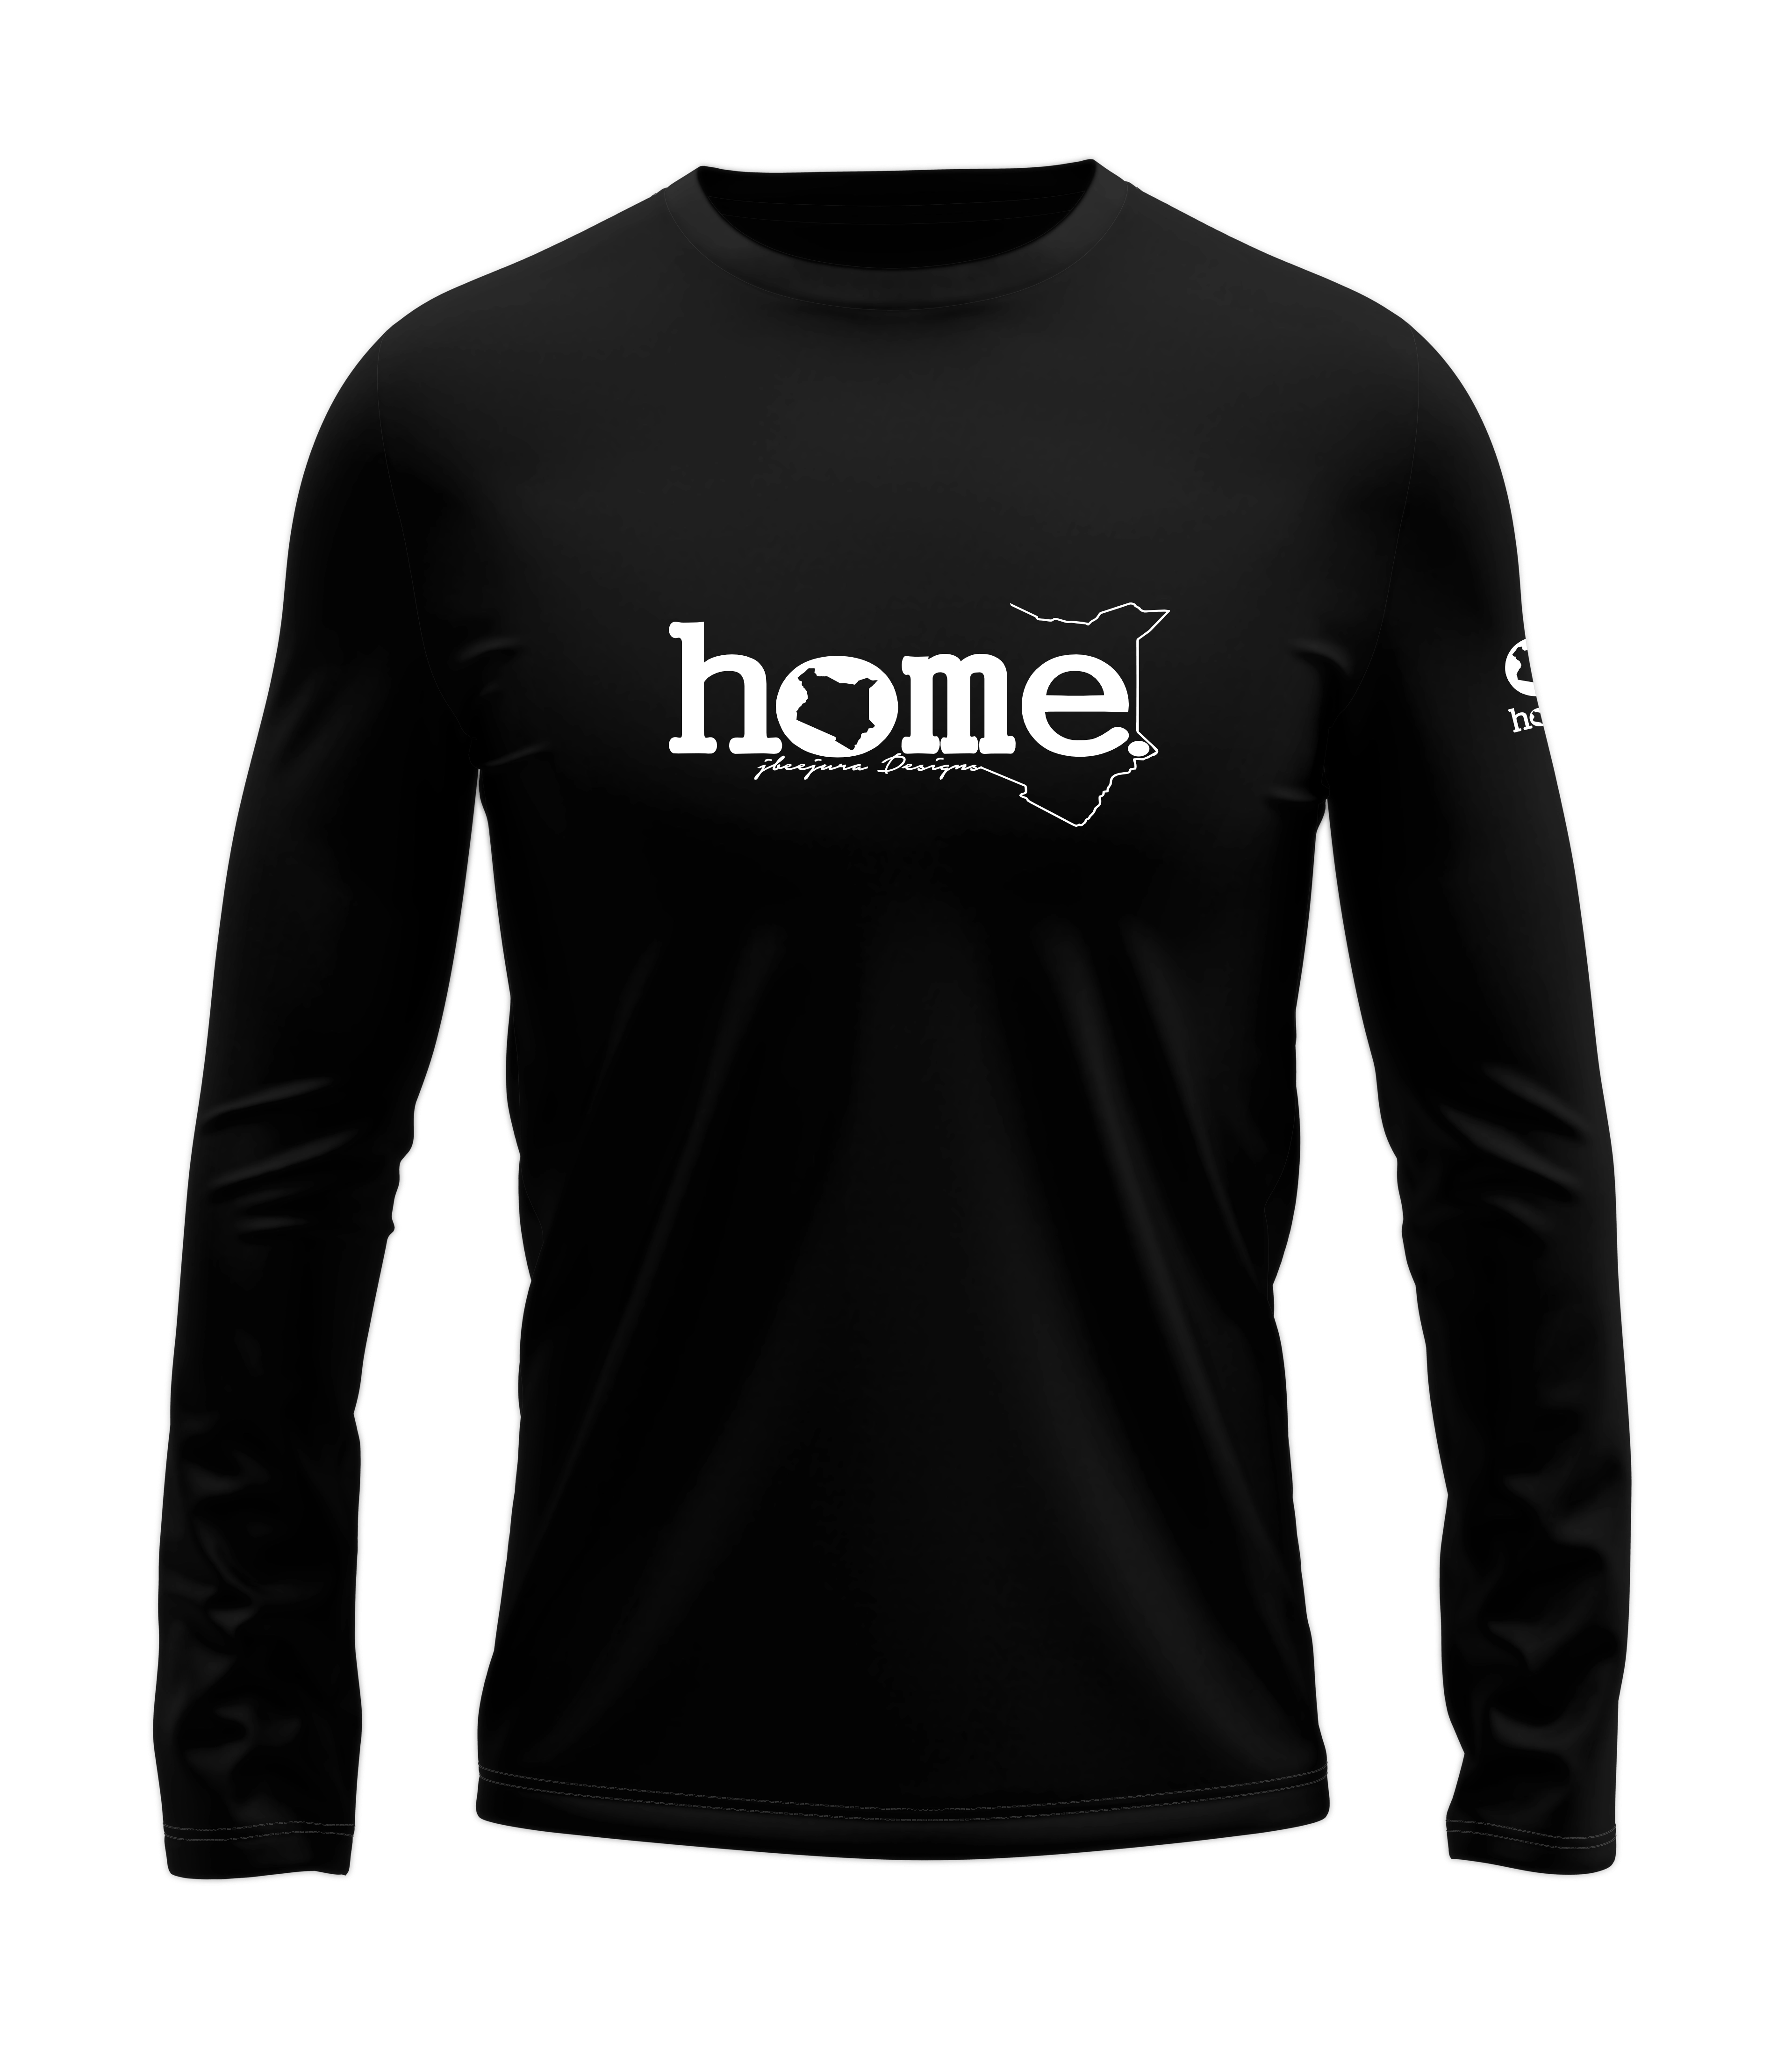 home_254 LONG-SLEEVED BLACK T-SHIRT WITH A WHITE CLASSIC WORDS PRINT – COTTON PLUS FABRIC